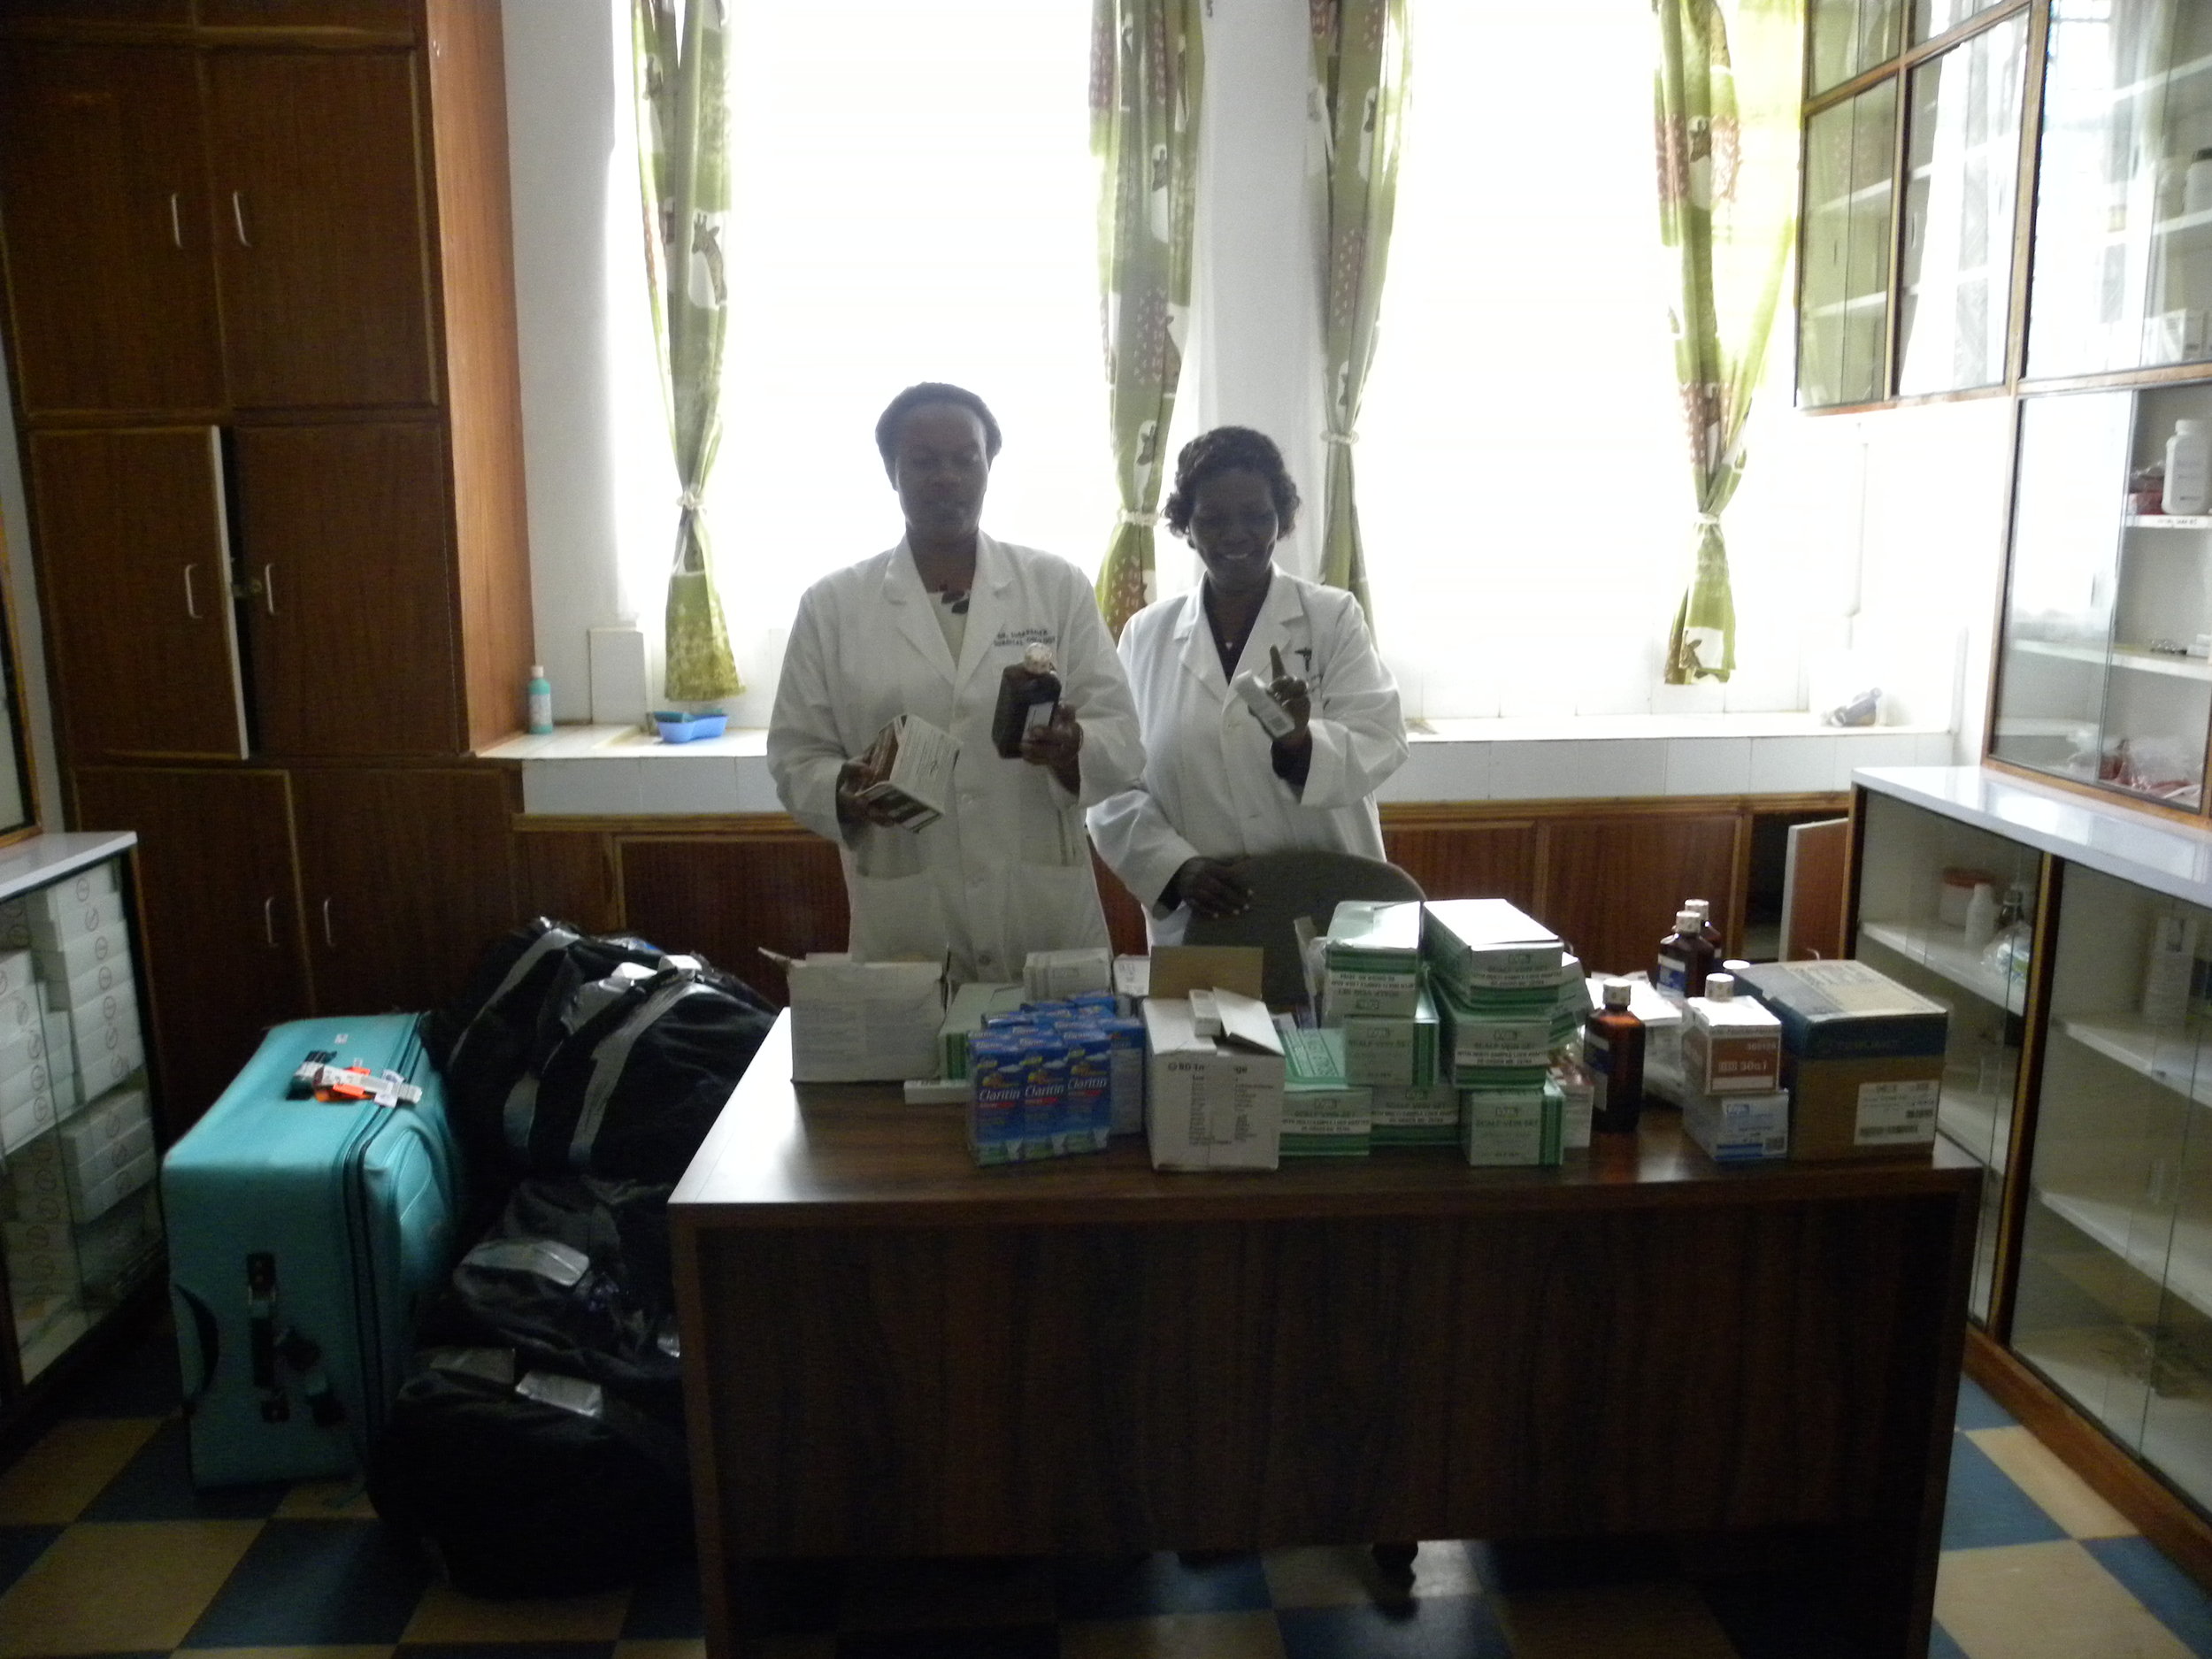  Nurses in the clinic office with the gloves donation.&nbsp; 